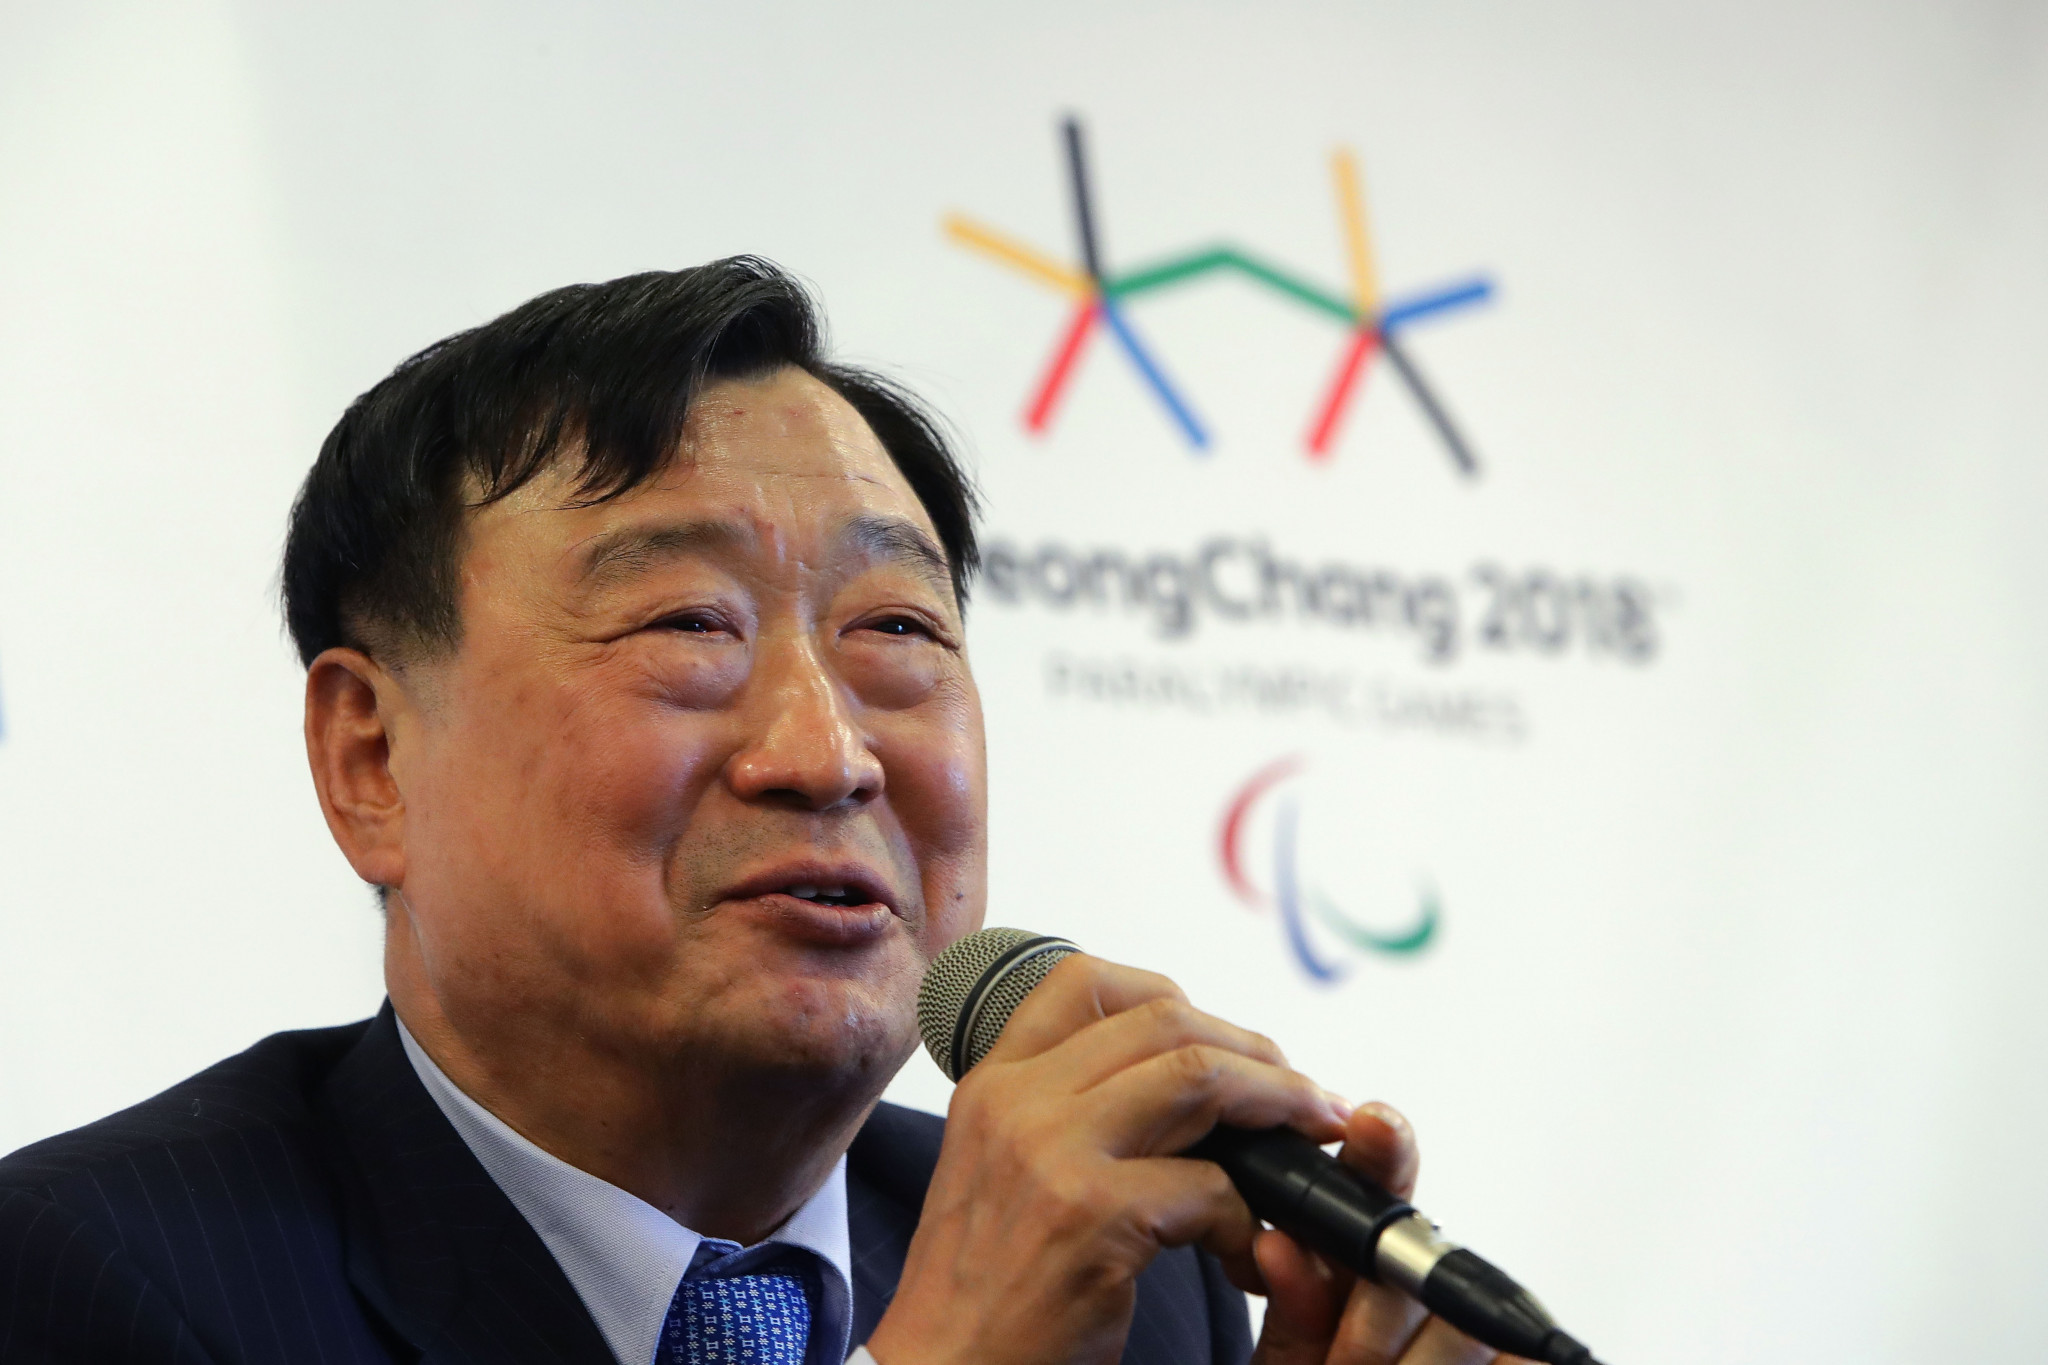 Lee Hee-beom insists Pyeongchang 2018 will be a success ©Getty Images